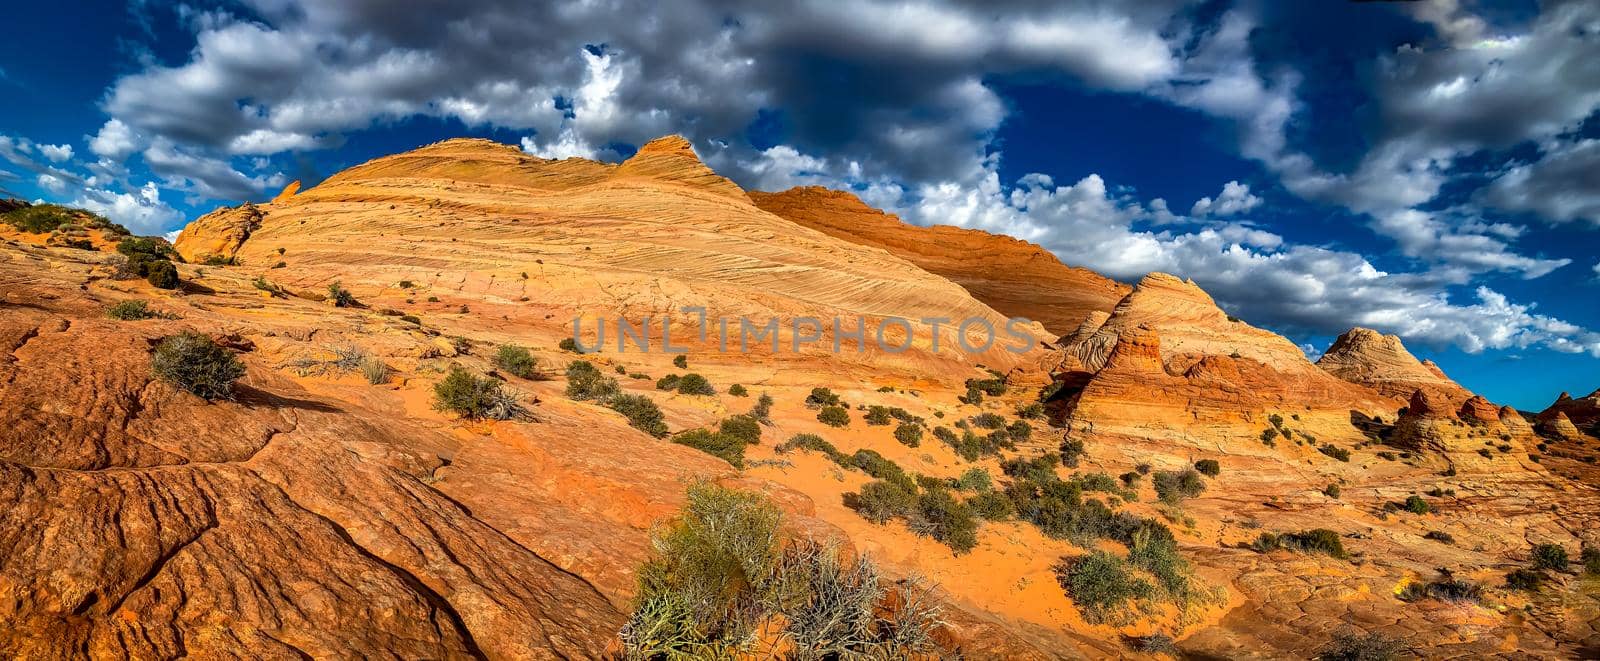 Sandstone formations in Coyote Butte North by gepeng